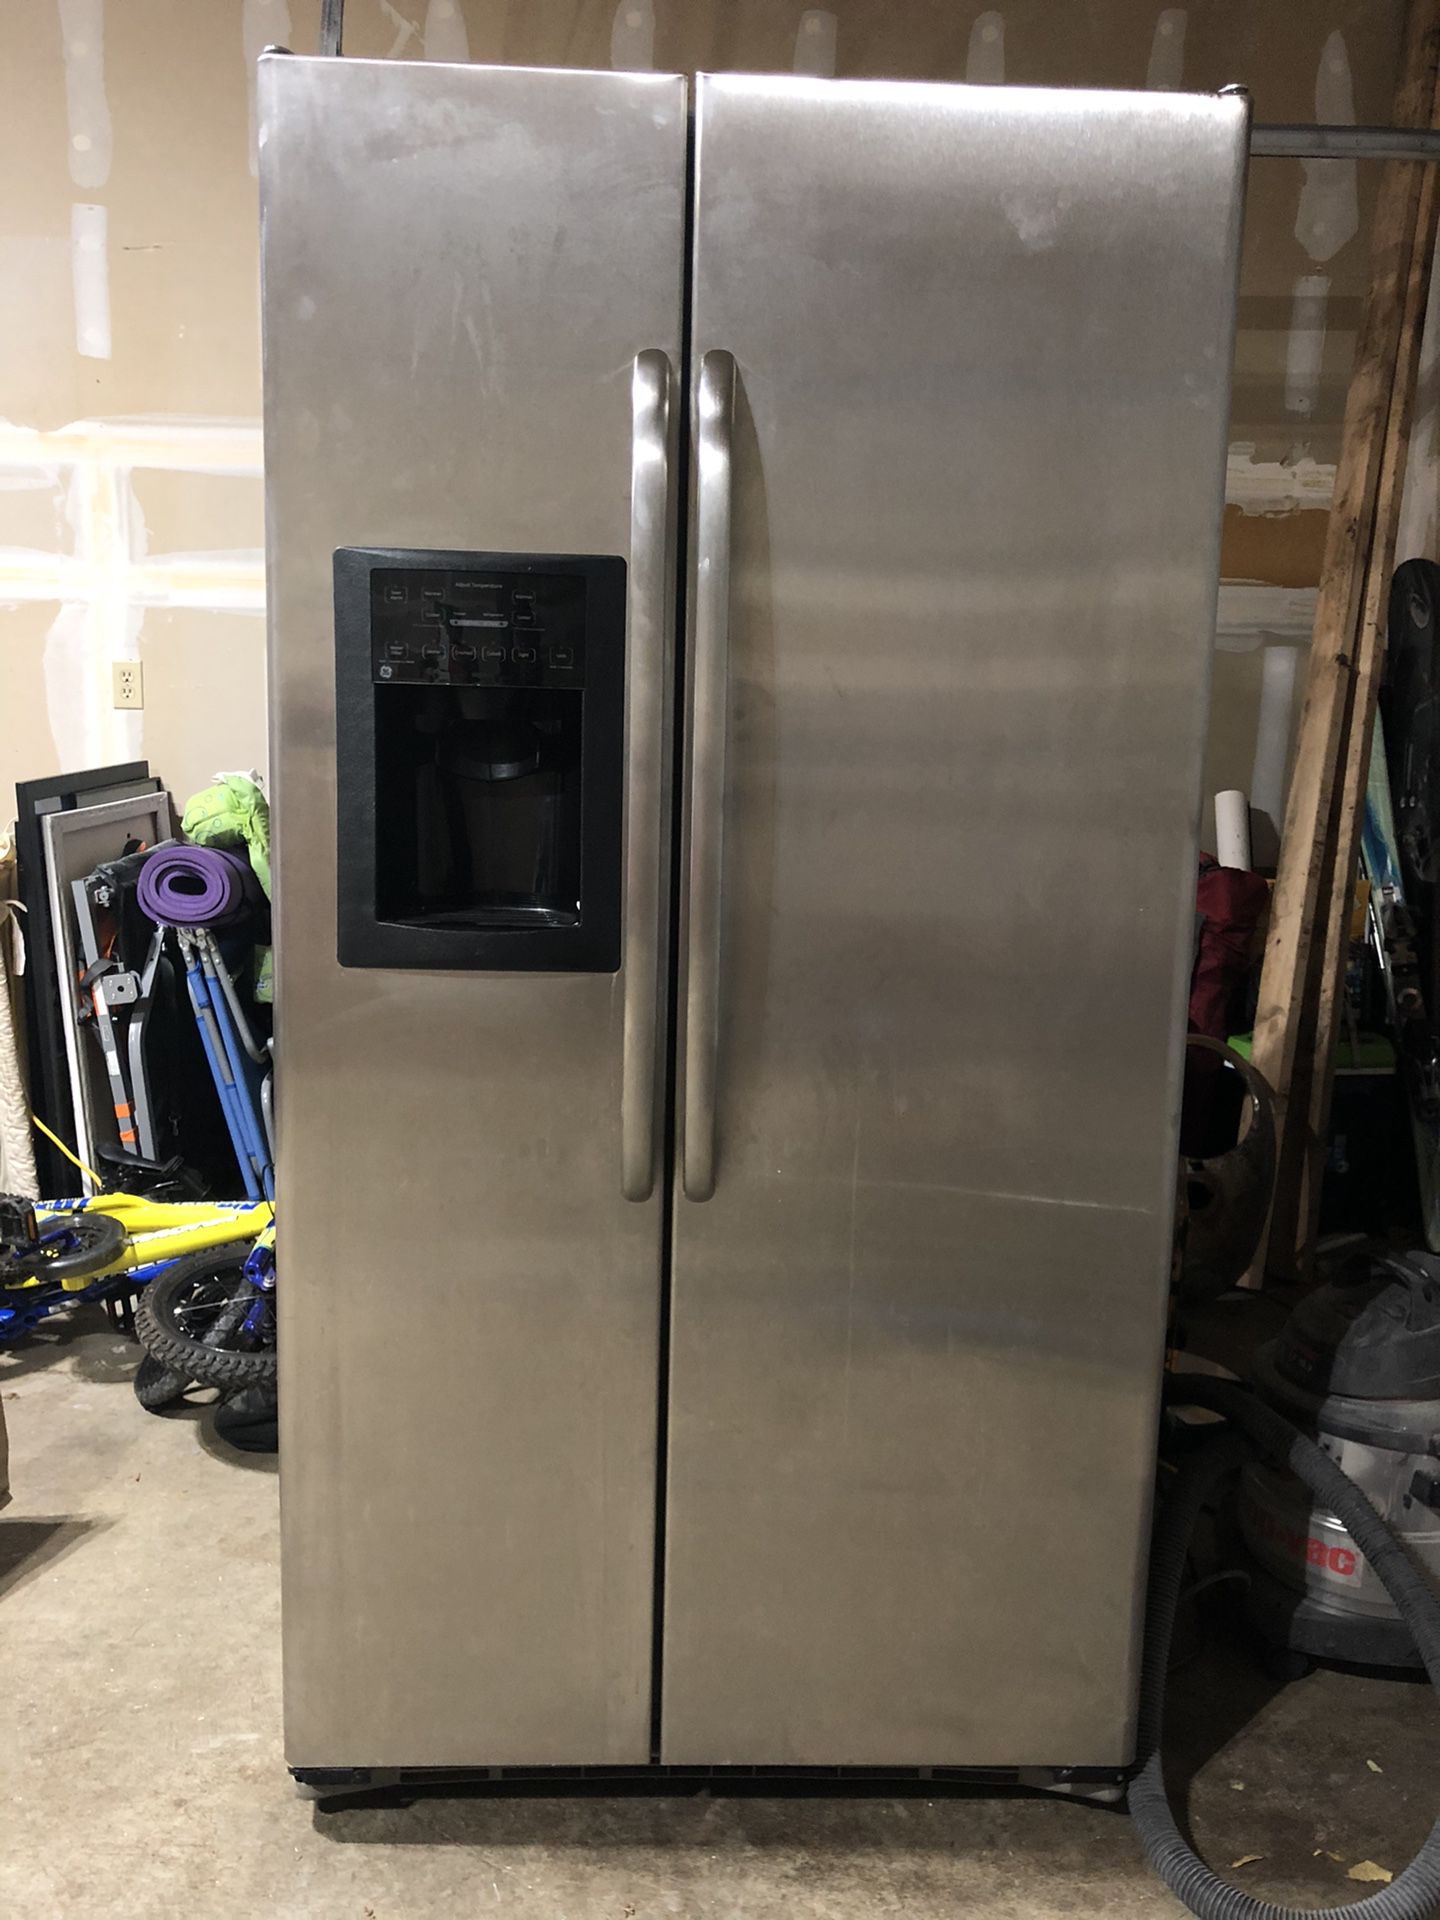 GE stainless steel 25.4 cu ft side-by-side refrigerator with ice maker